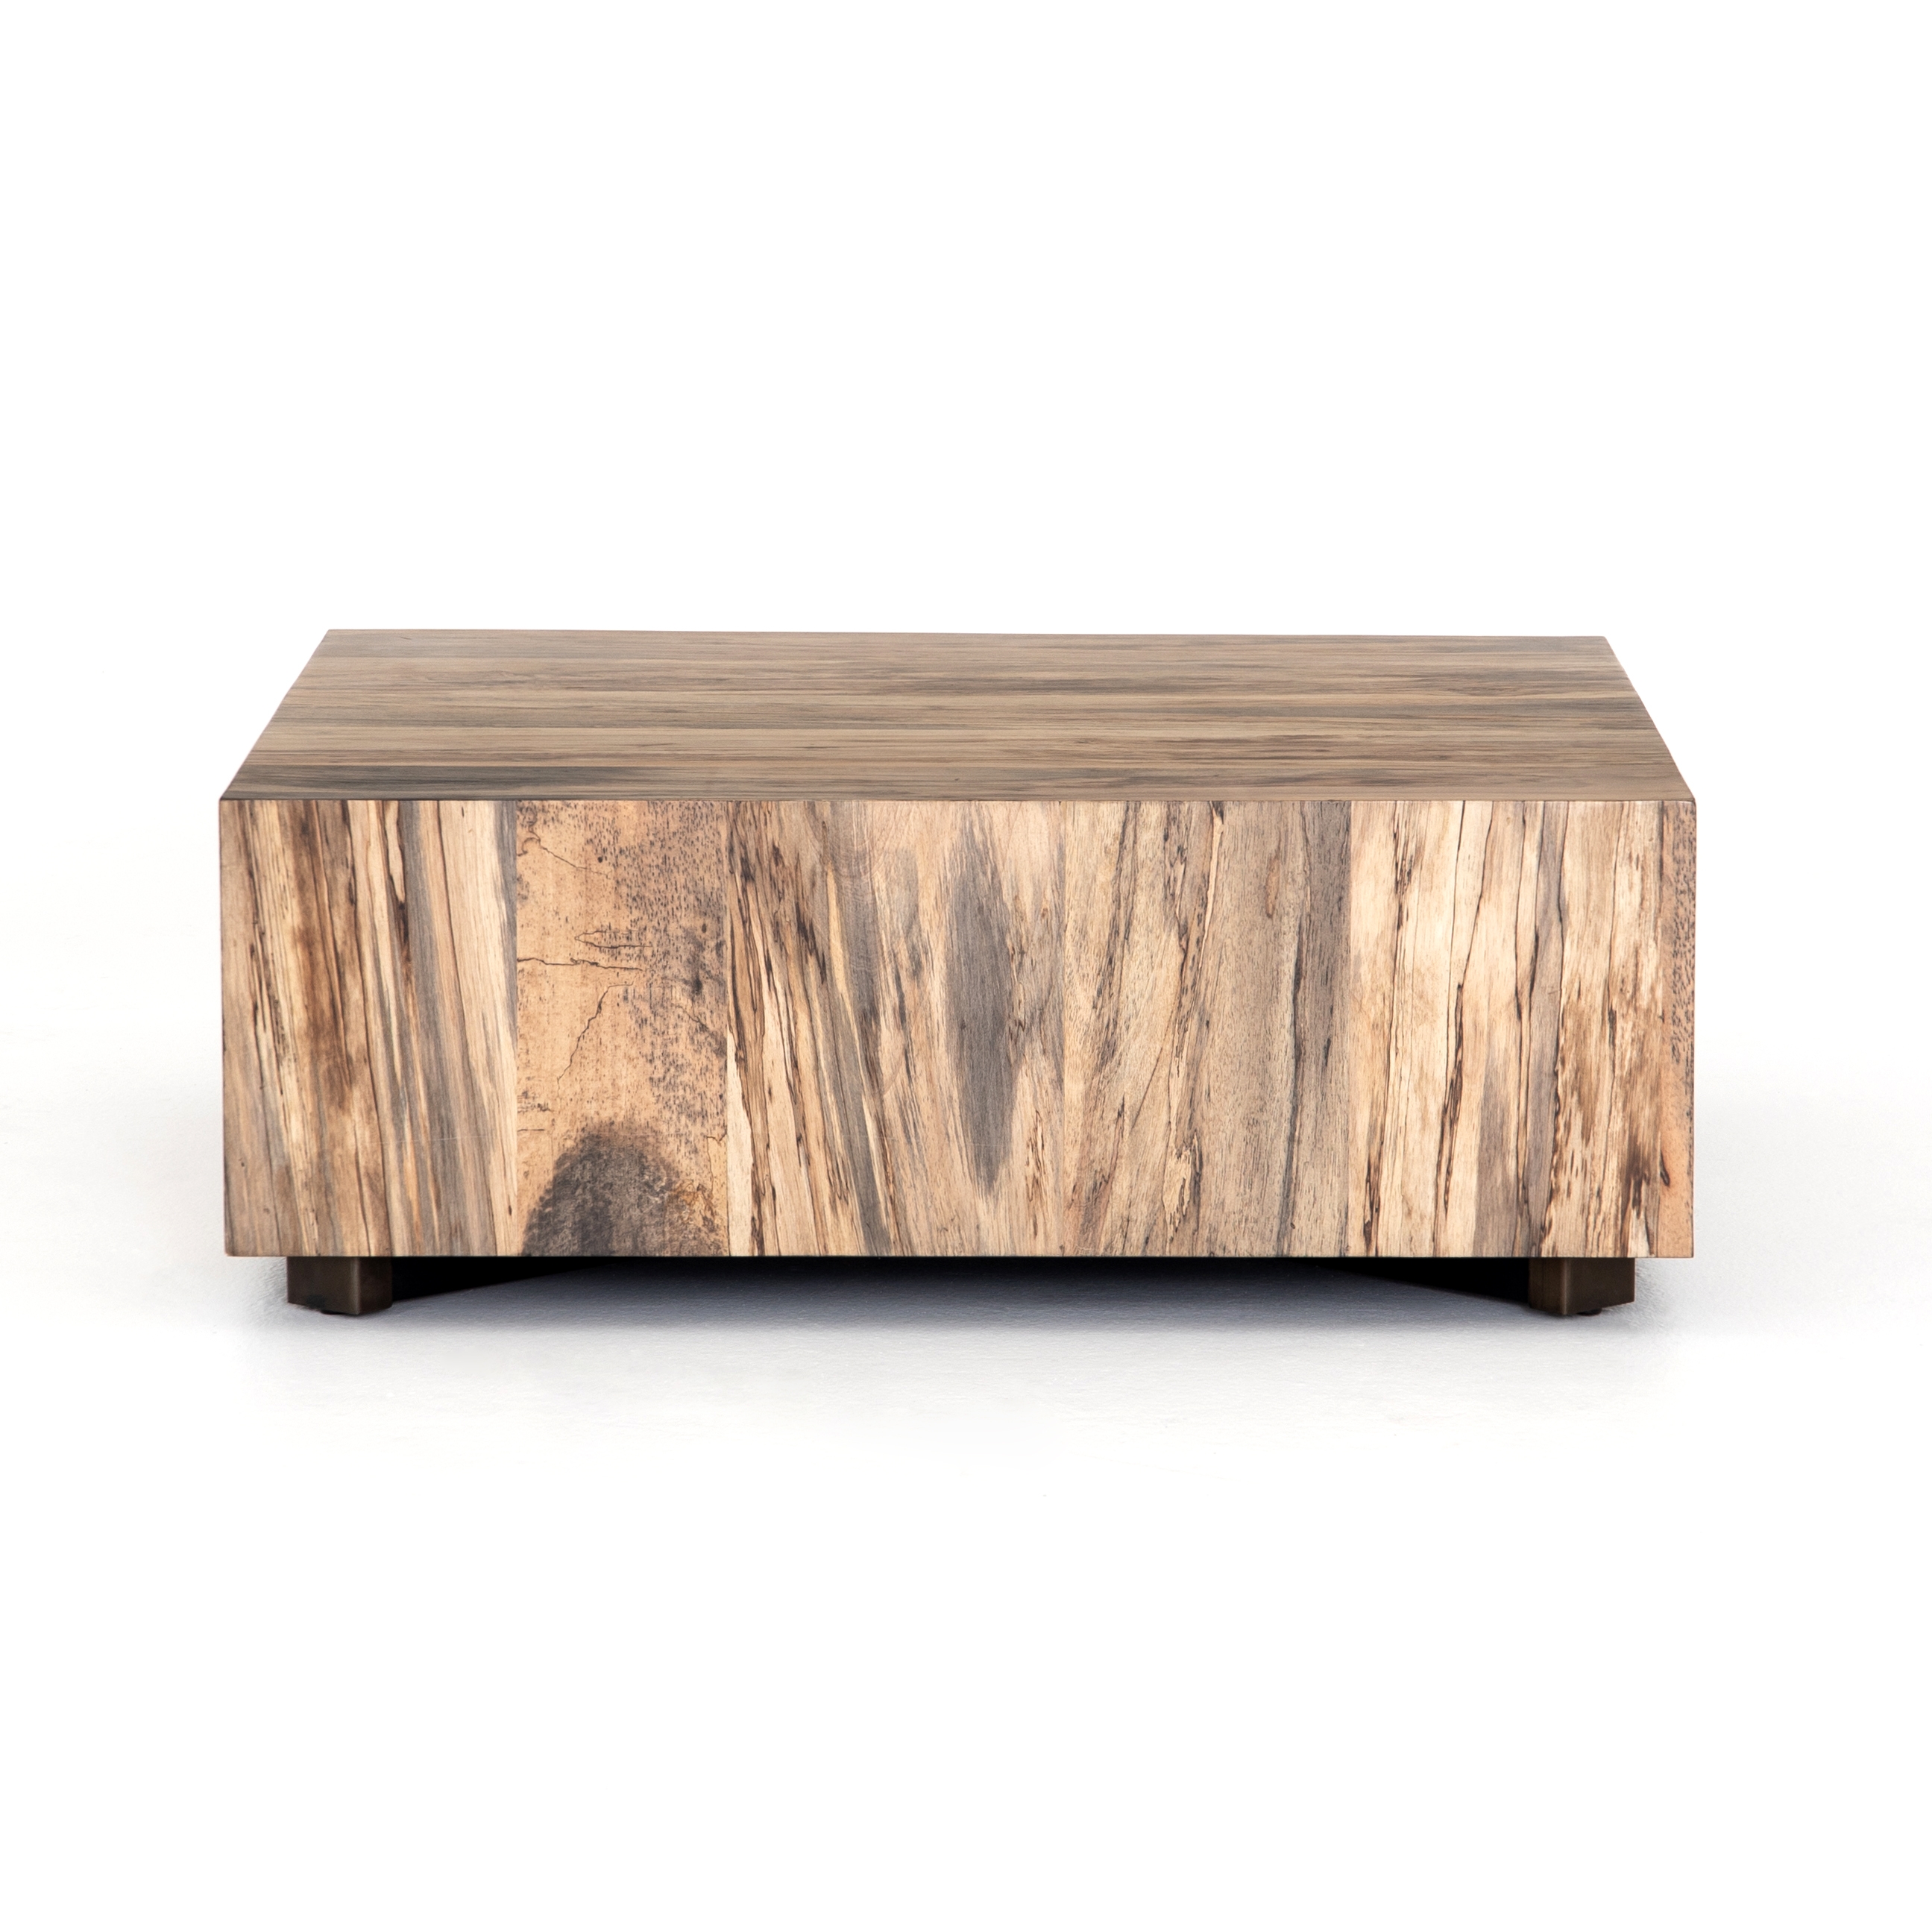 Hudson Square Coffee Table-Spalted Prmvr - Image 3